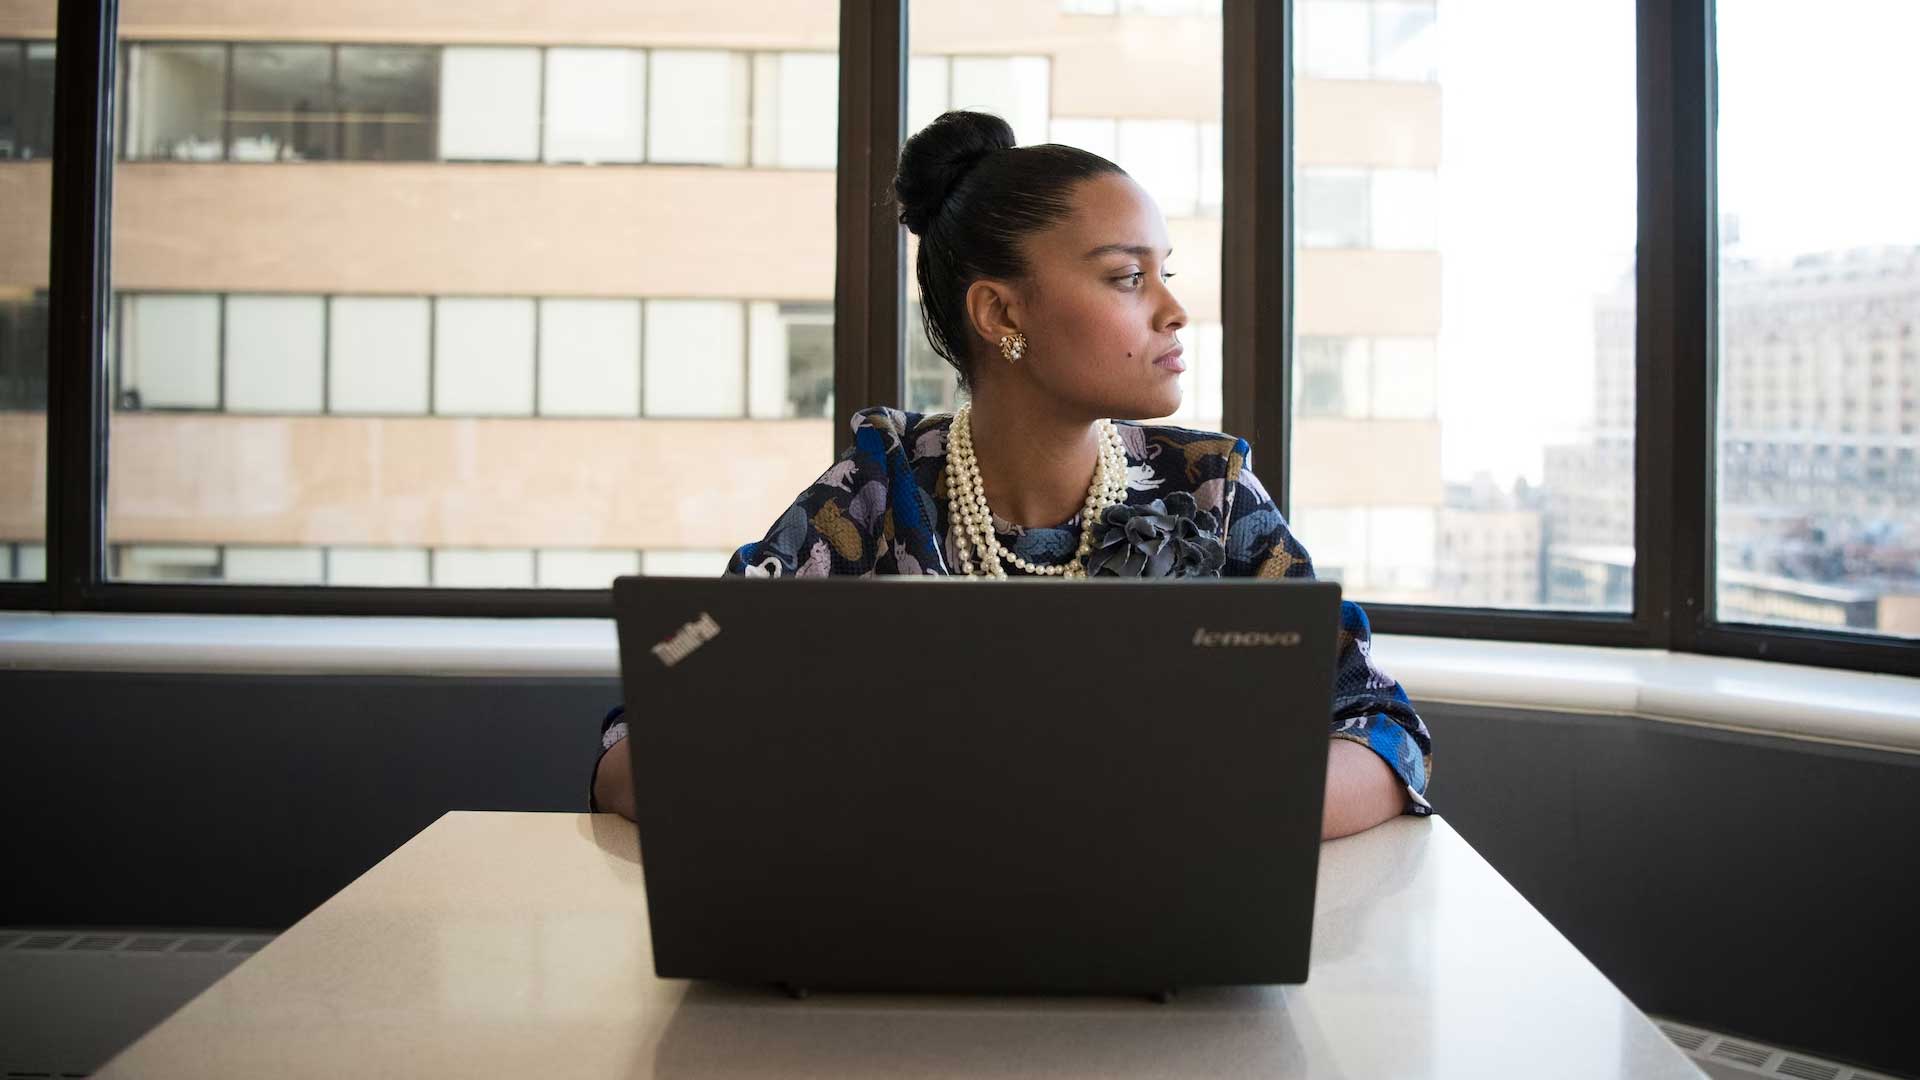 Woman with a laptop in an office environment. She is gazing into the distance.